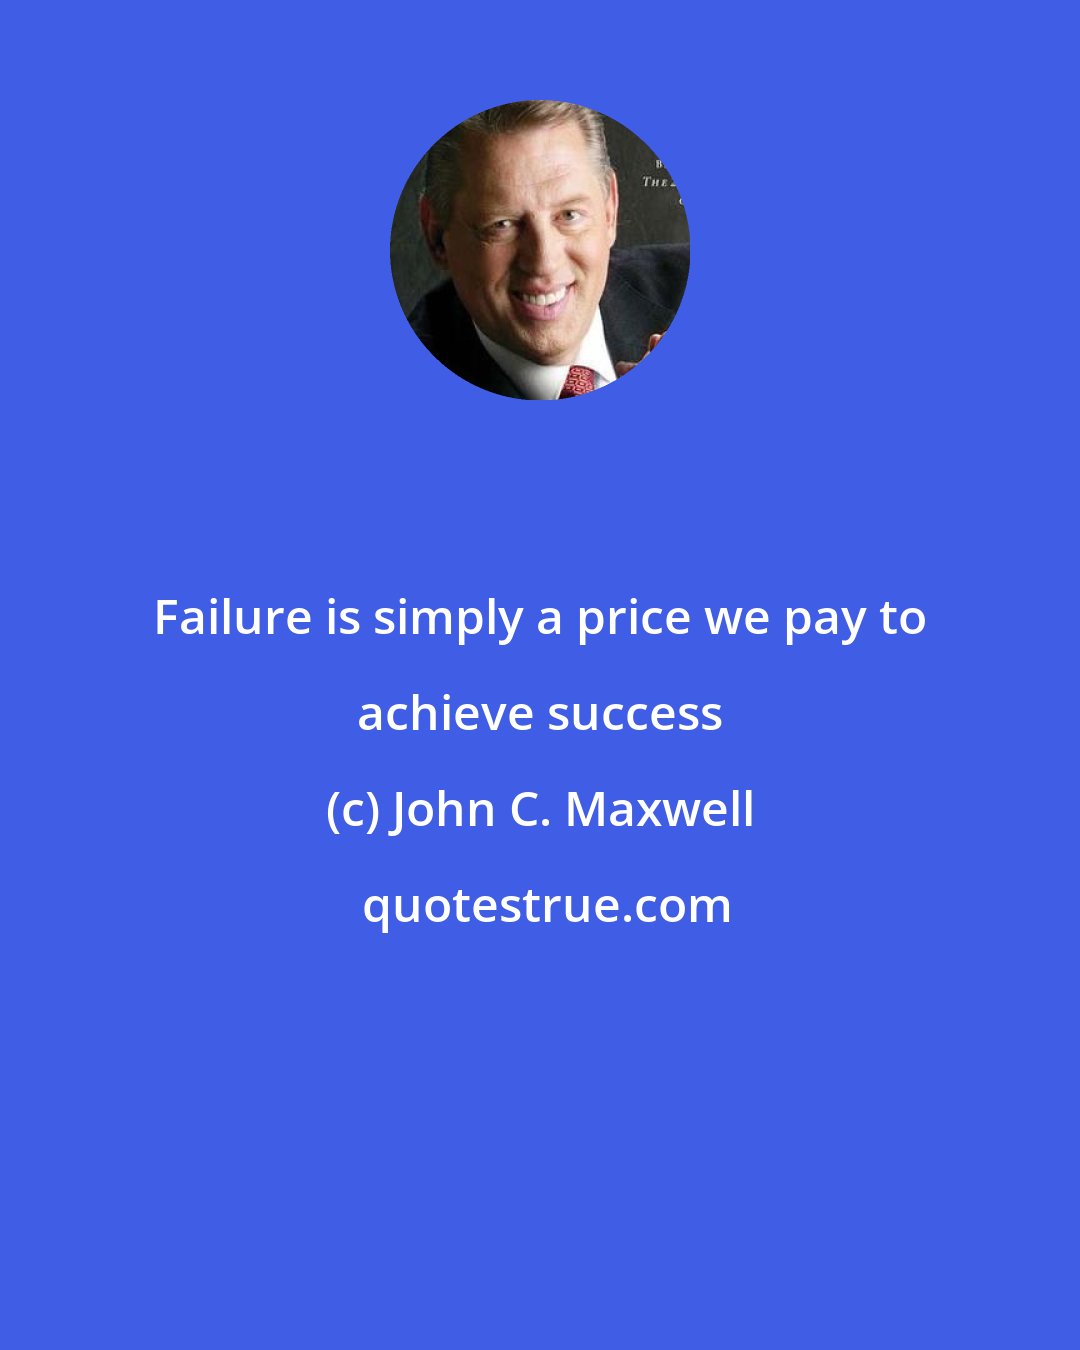 John C. Maxwell: Failure is simply a price we pay to achieve success